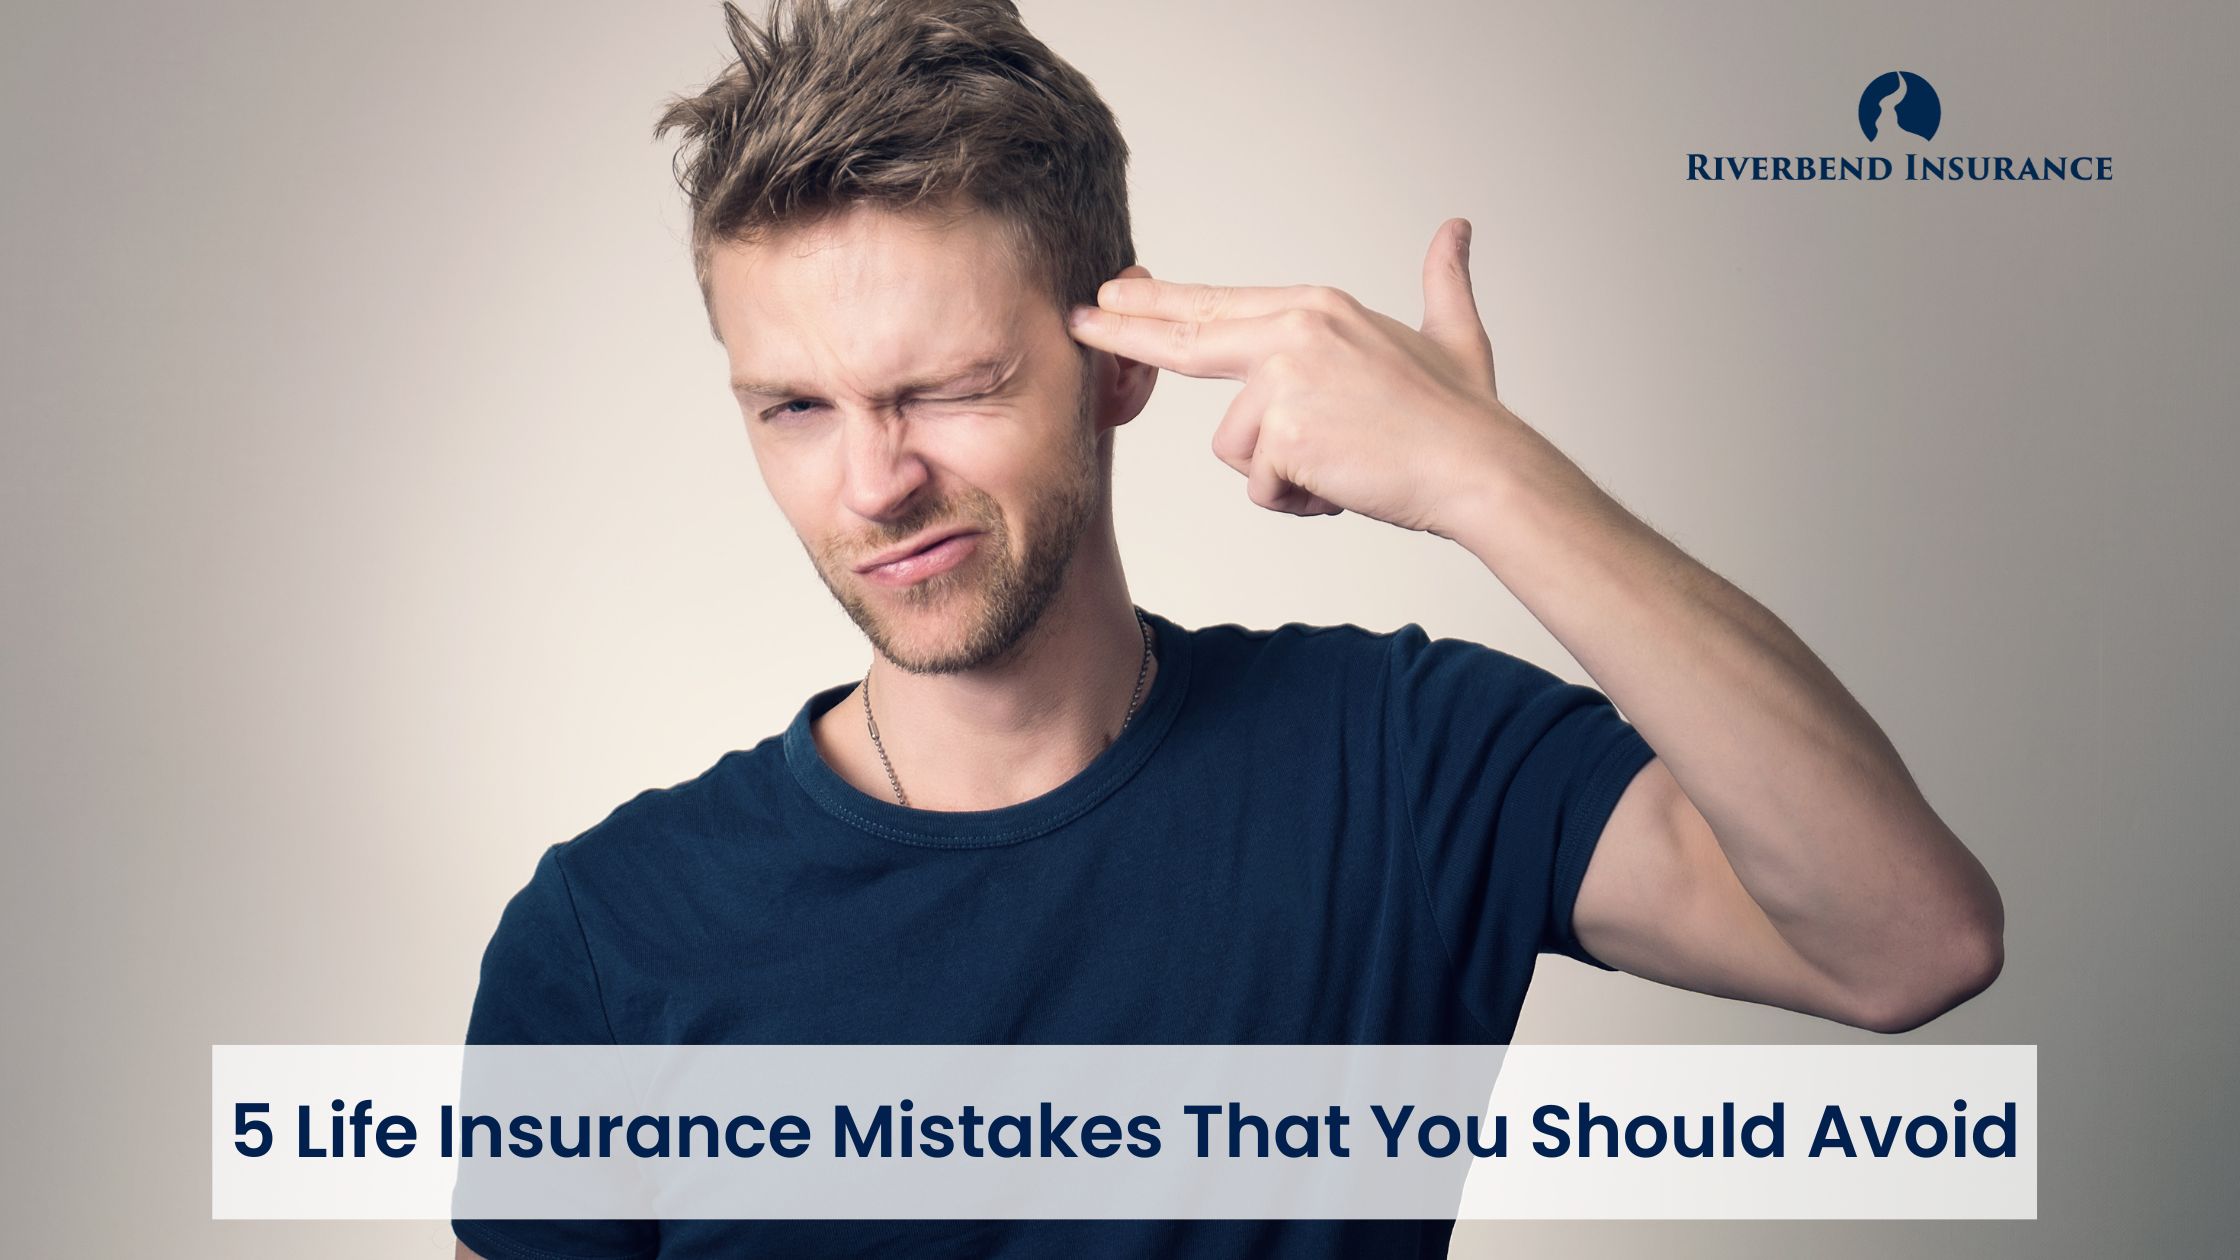 Life Insurance Mistakes: Check 5 Things You Should Avoid